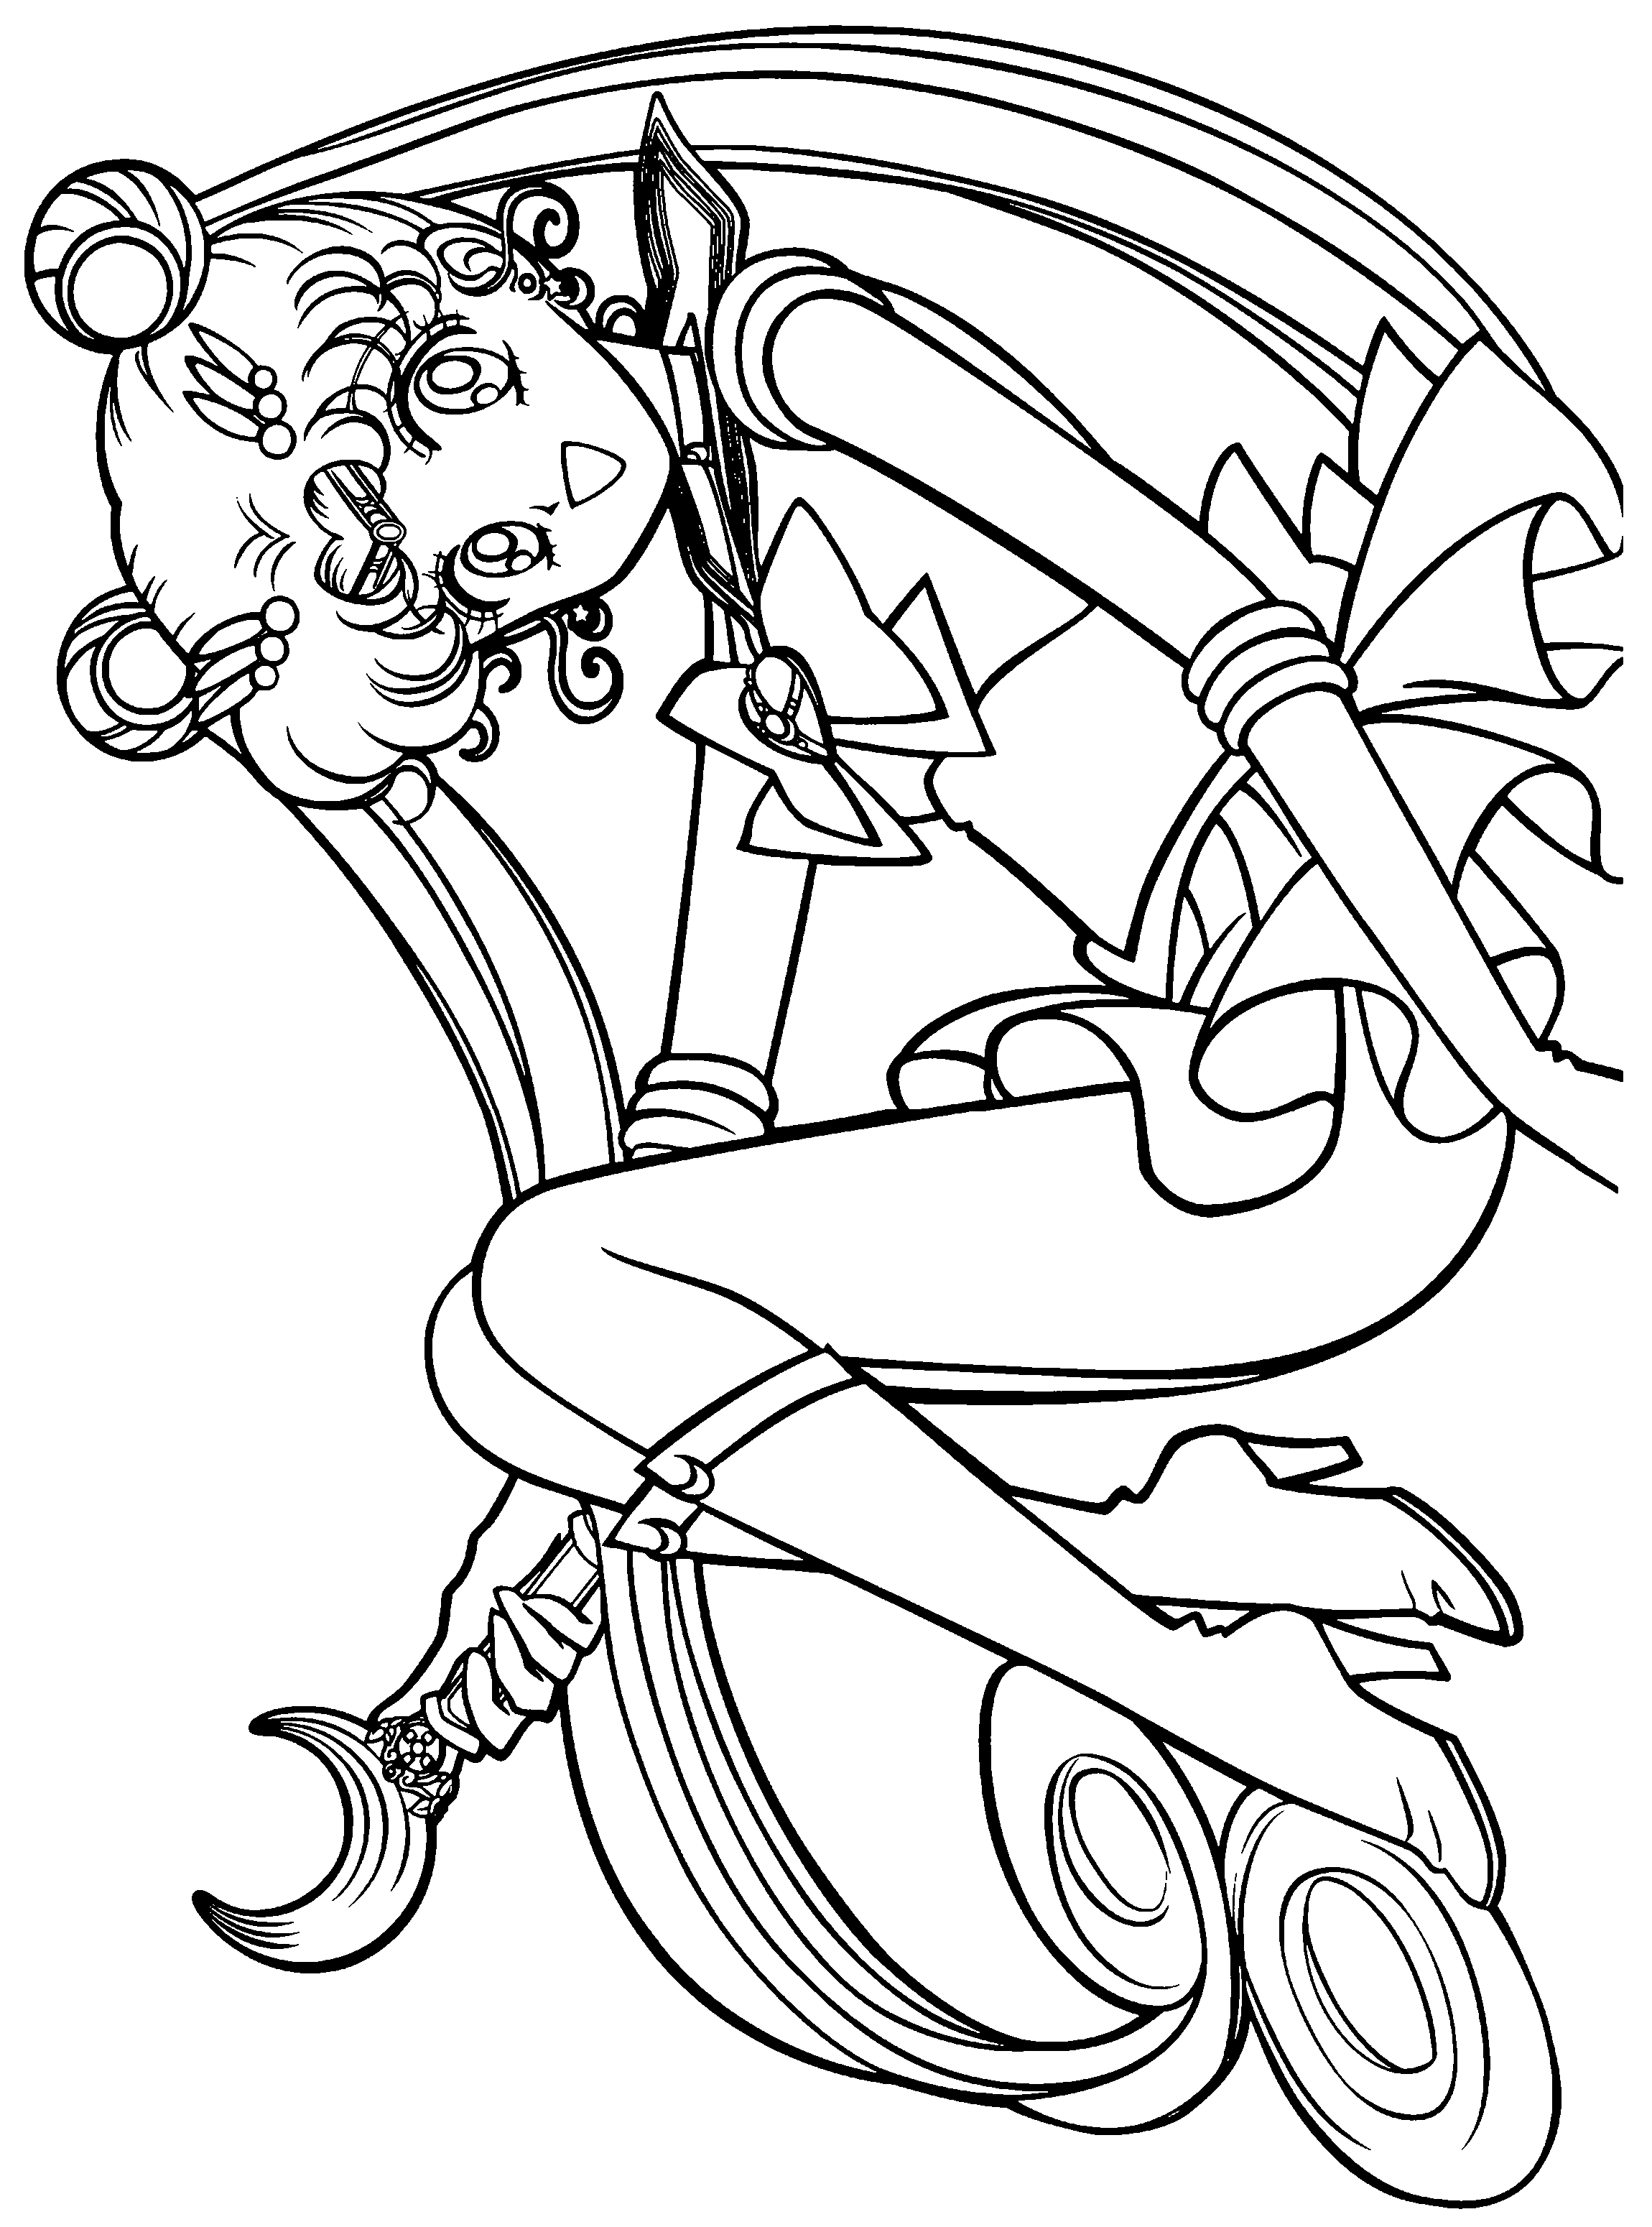 Super Sailor Moon Free coloring page